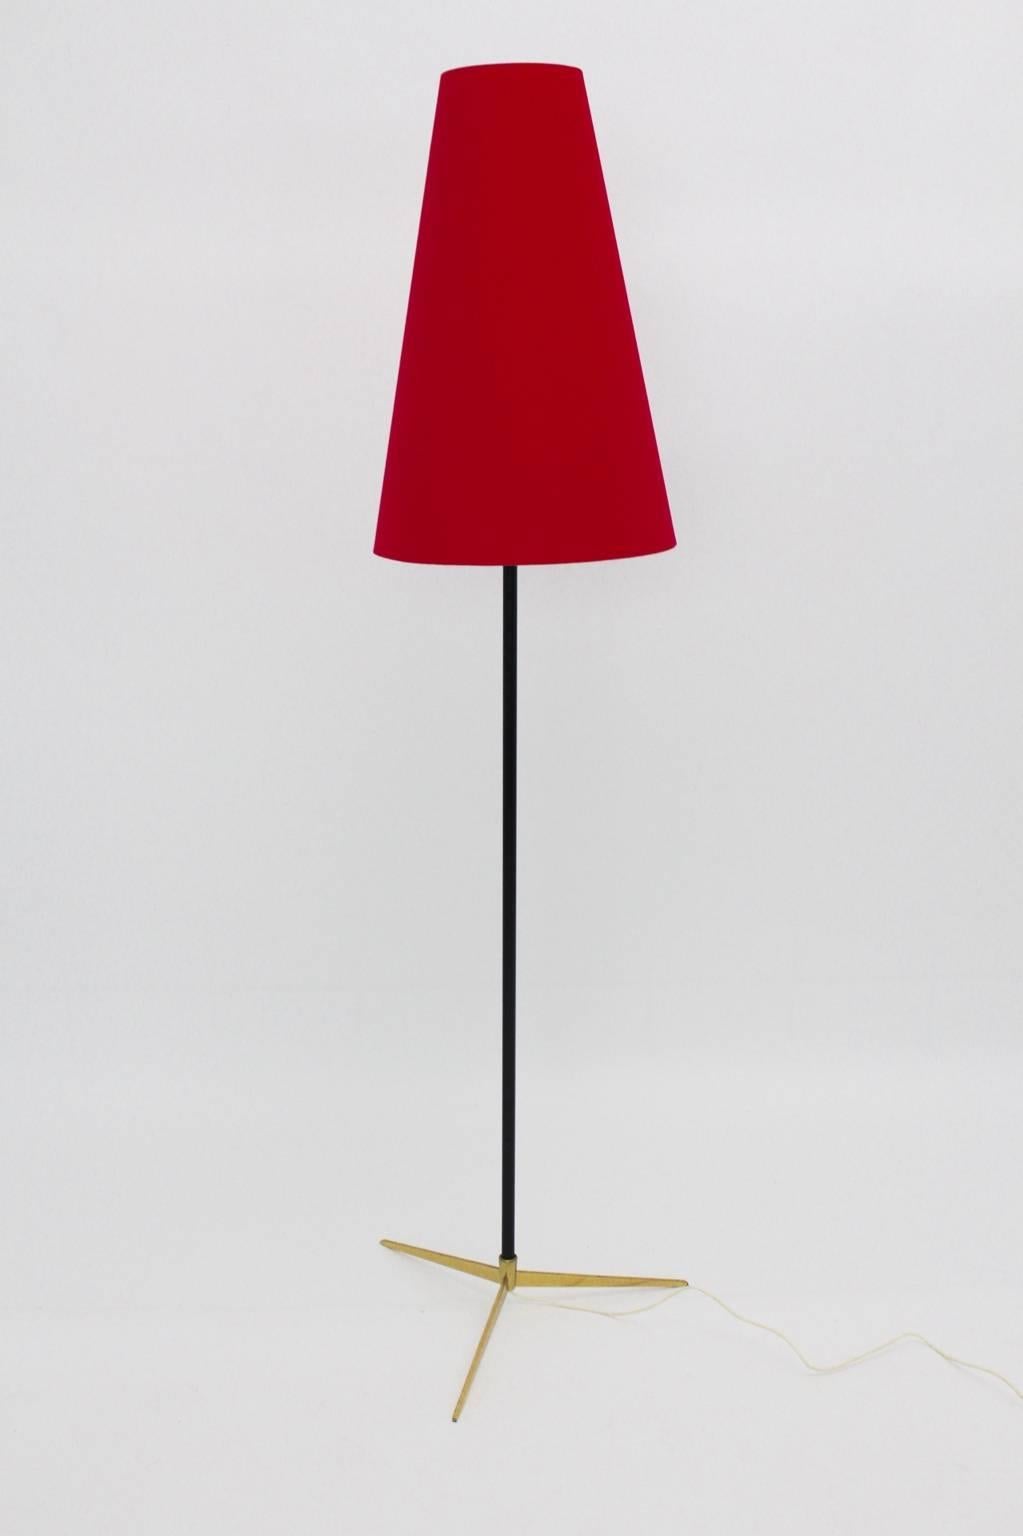 Mid century modern floor lamp model Micheline no. 2092 was designed and executed by J.T. Kalmar, Vienna, Austria, 1960.
The floor lamp shows brass foot and a black lacquered tube steel stem.
Also the renewed lamp shade is covered with a red